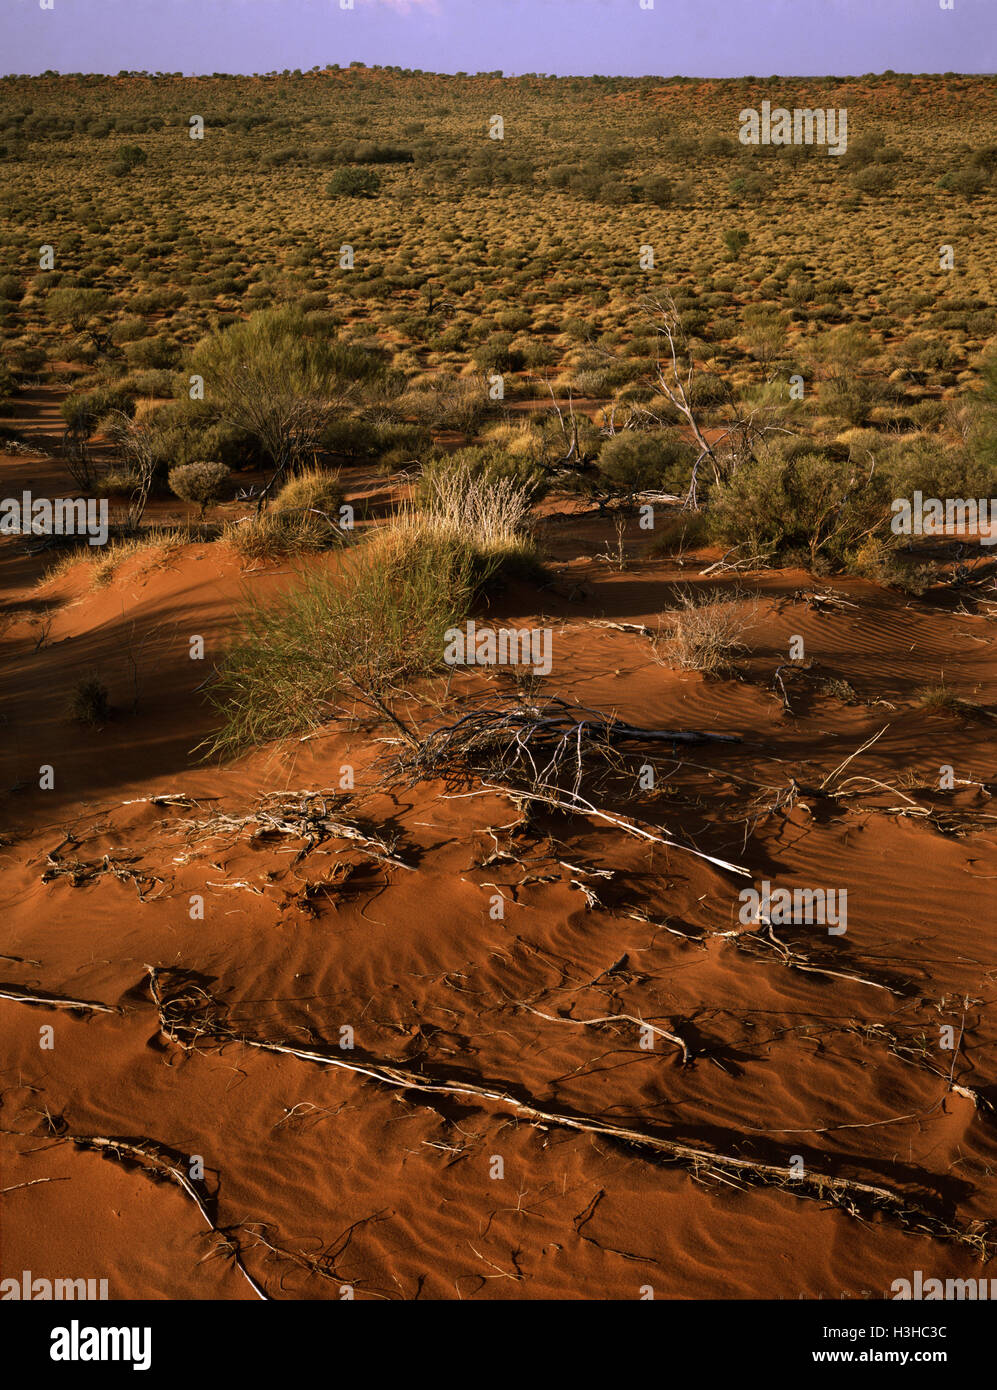 Sand dunes along Canning Stock Route, Stock Photo